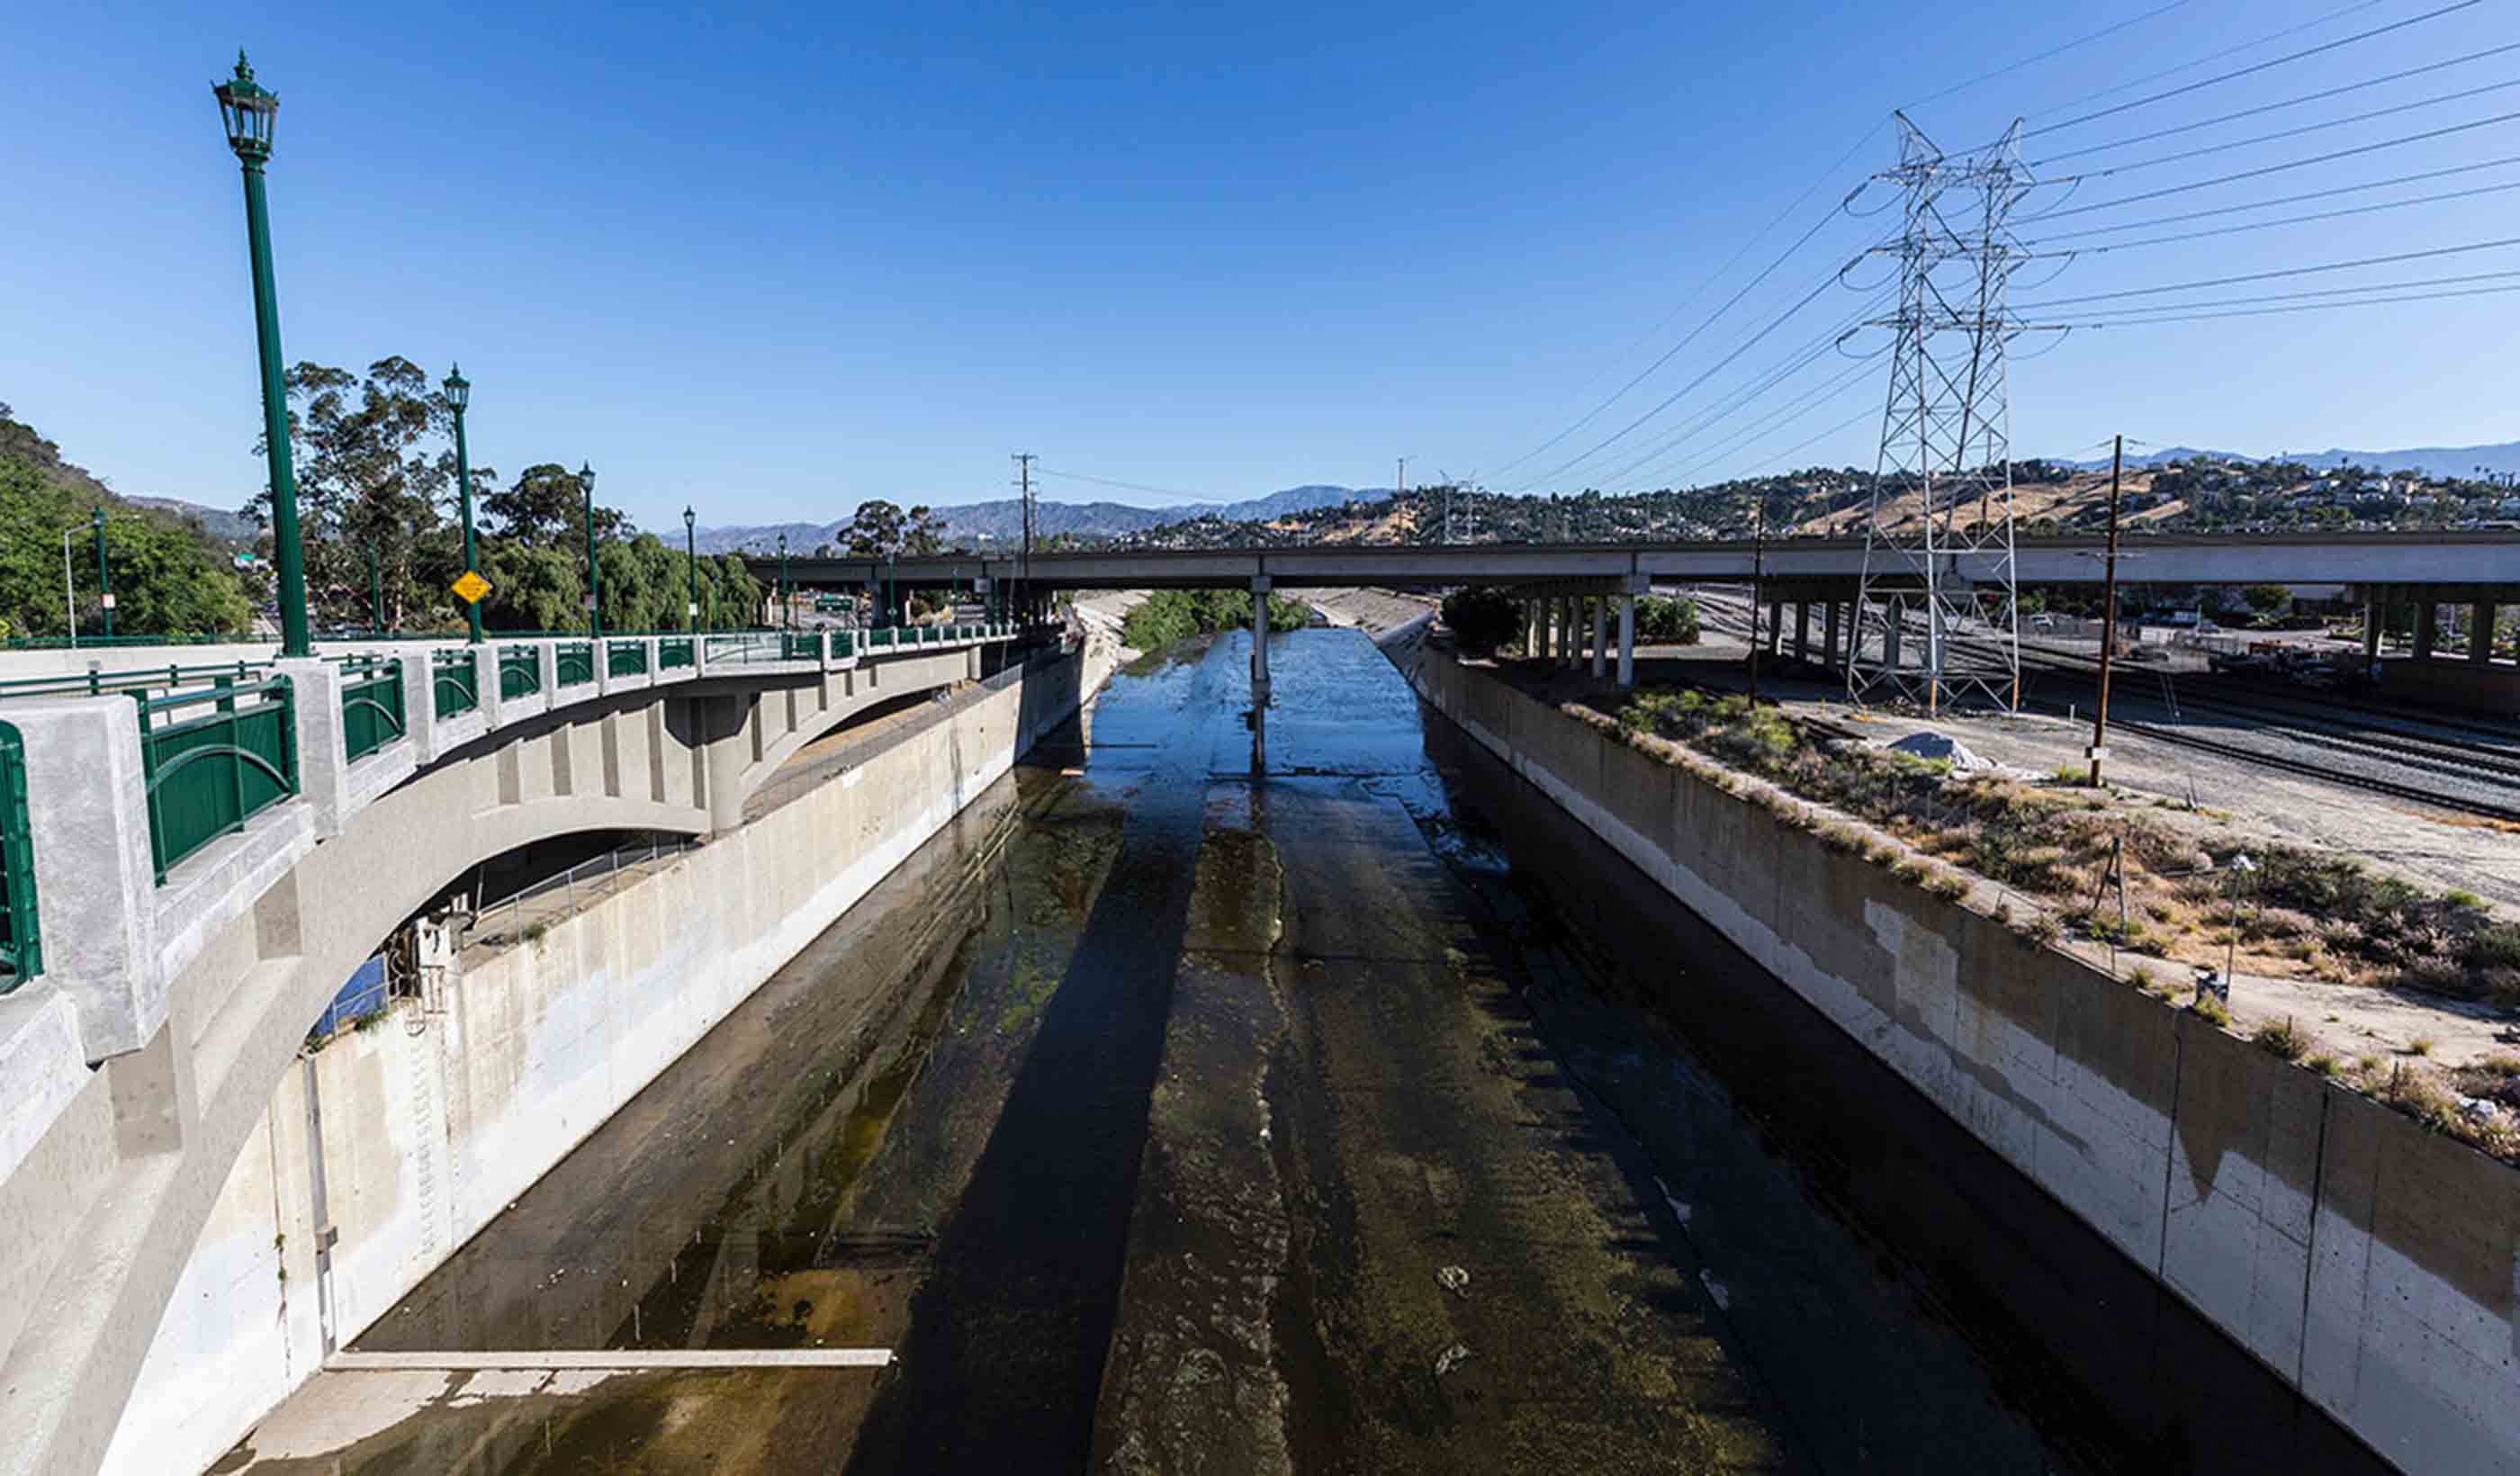 Water reuse and river flows: What can we learn from the LA River?